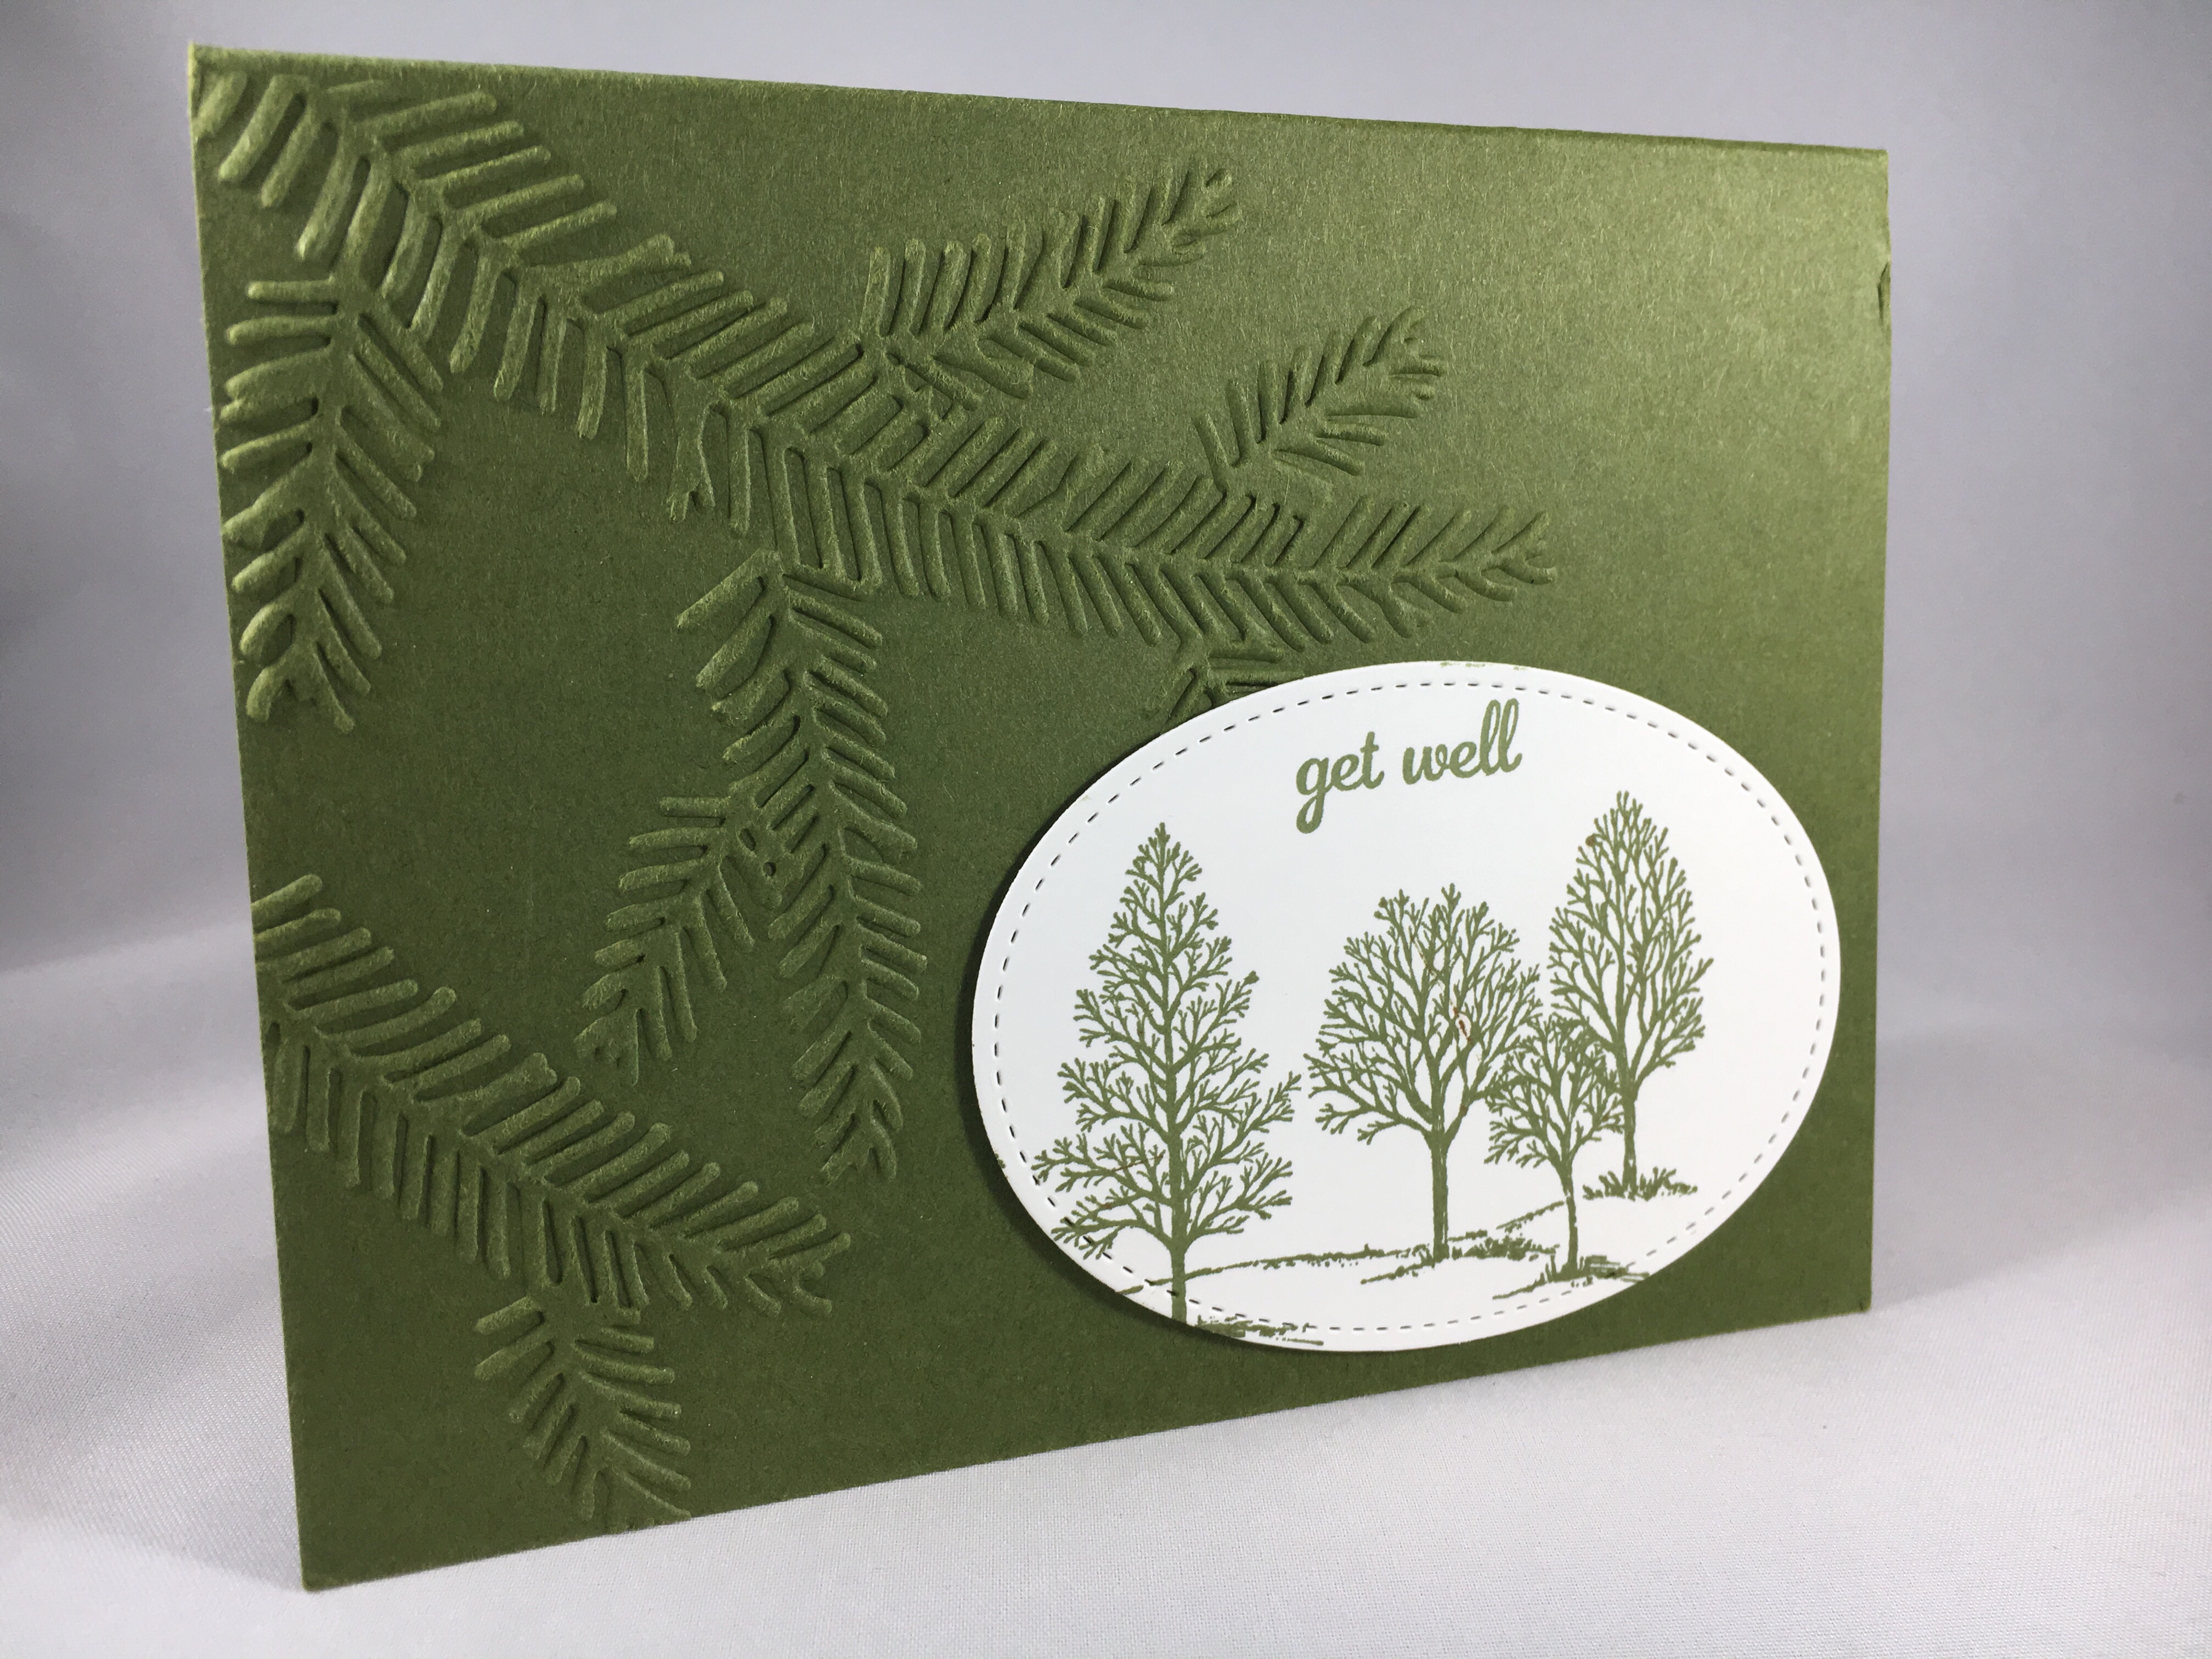 Stampin Up Lovely as A Tree get well card idea - For inspiration, project details, ordering, and more visit www.juststampin.com Jeanie Stark StampinUp